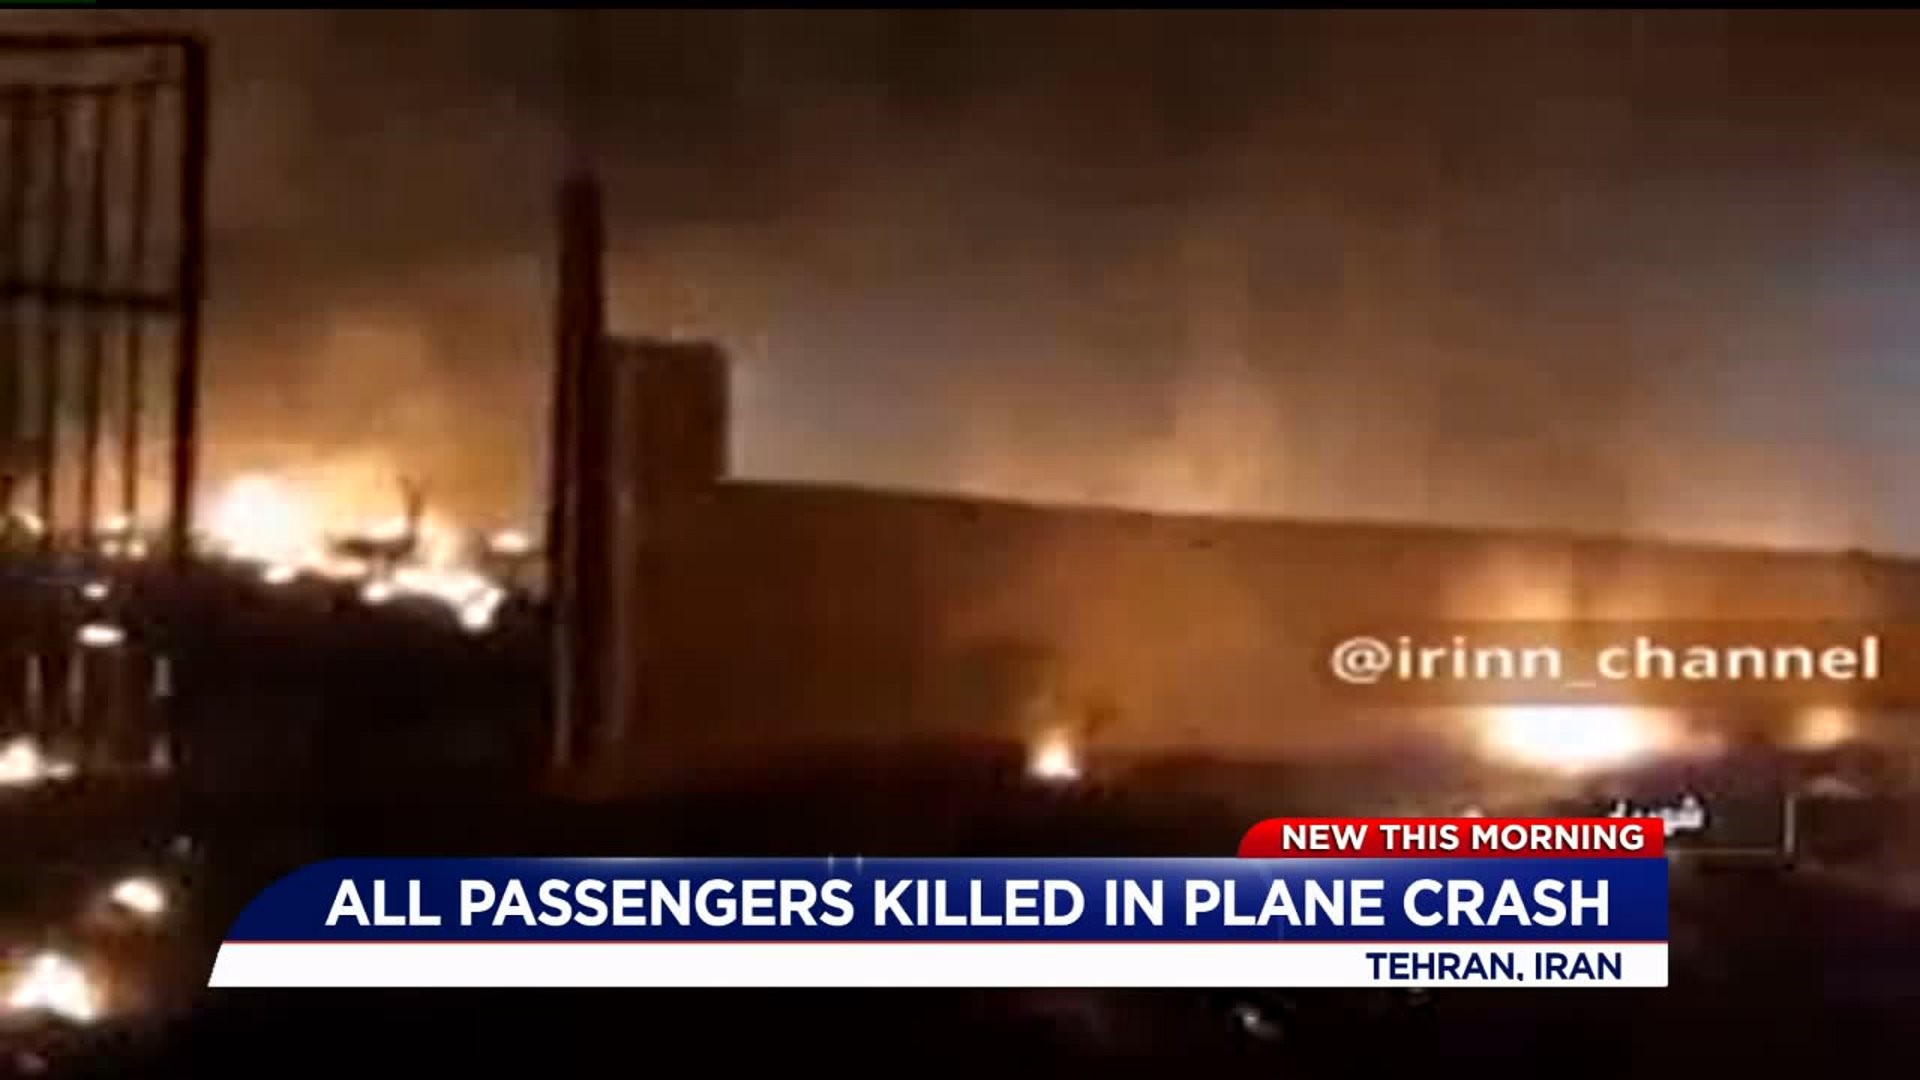 More than 170 dead after plane crash in Iran